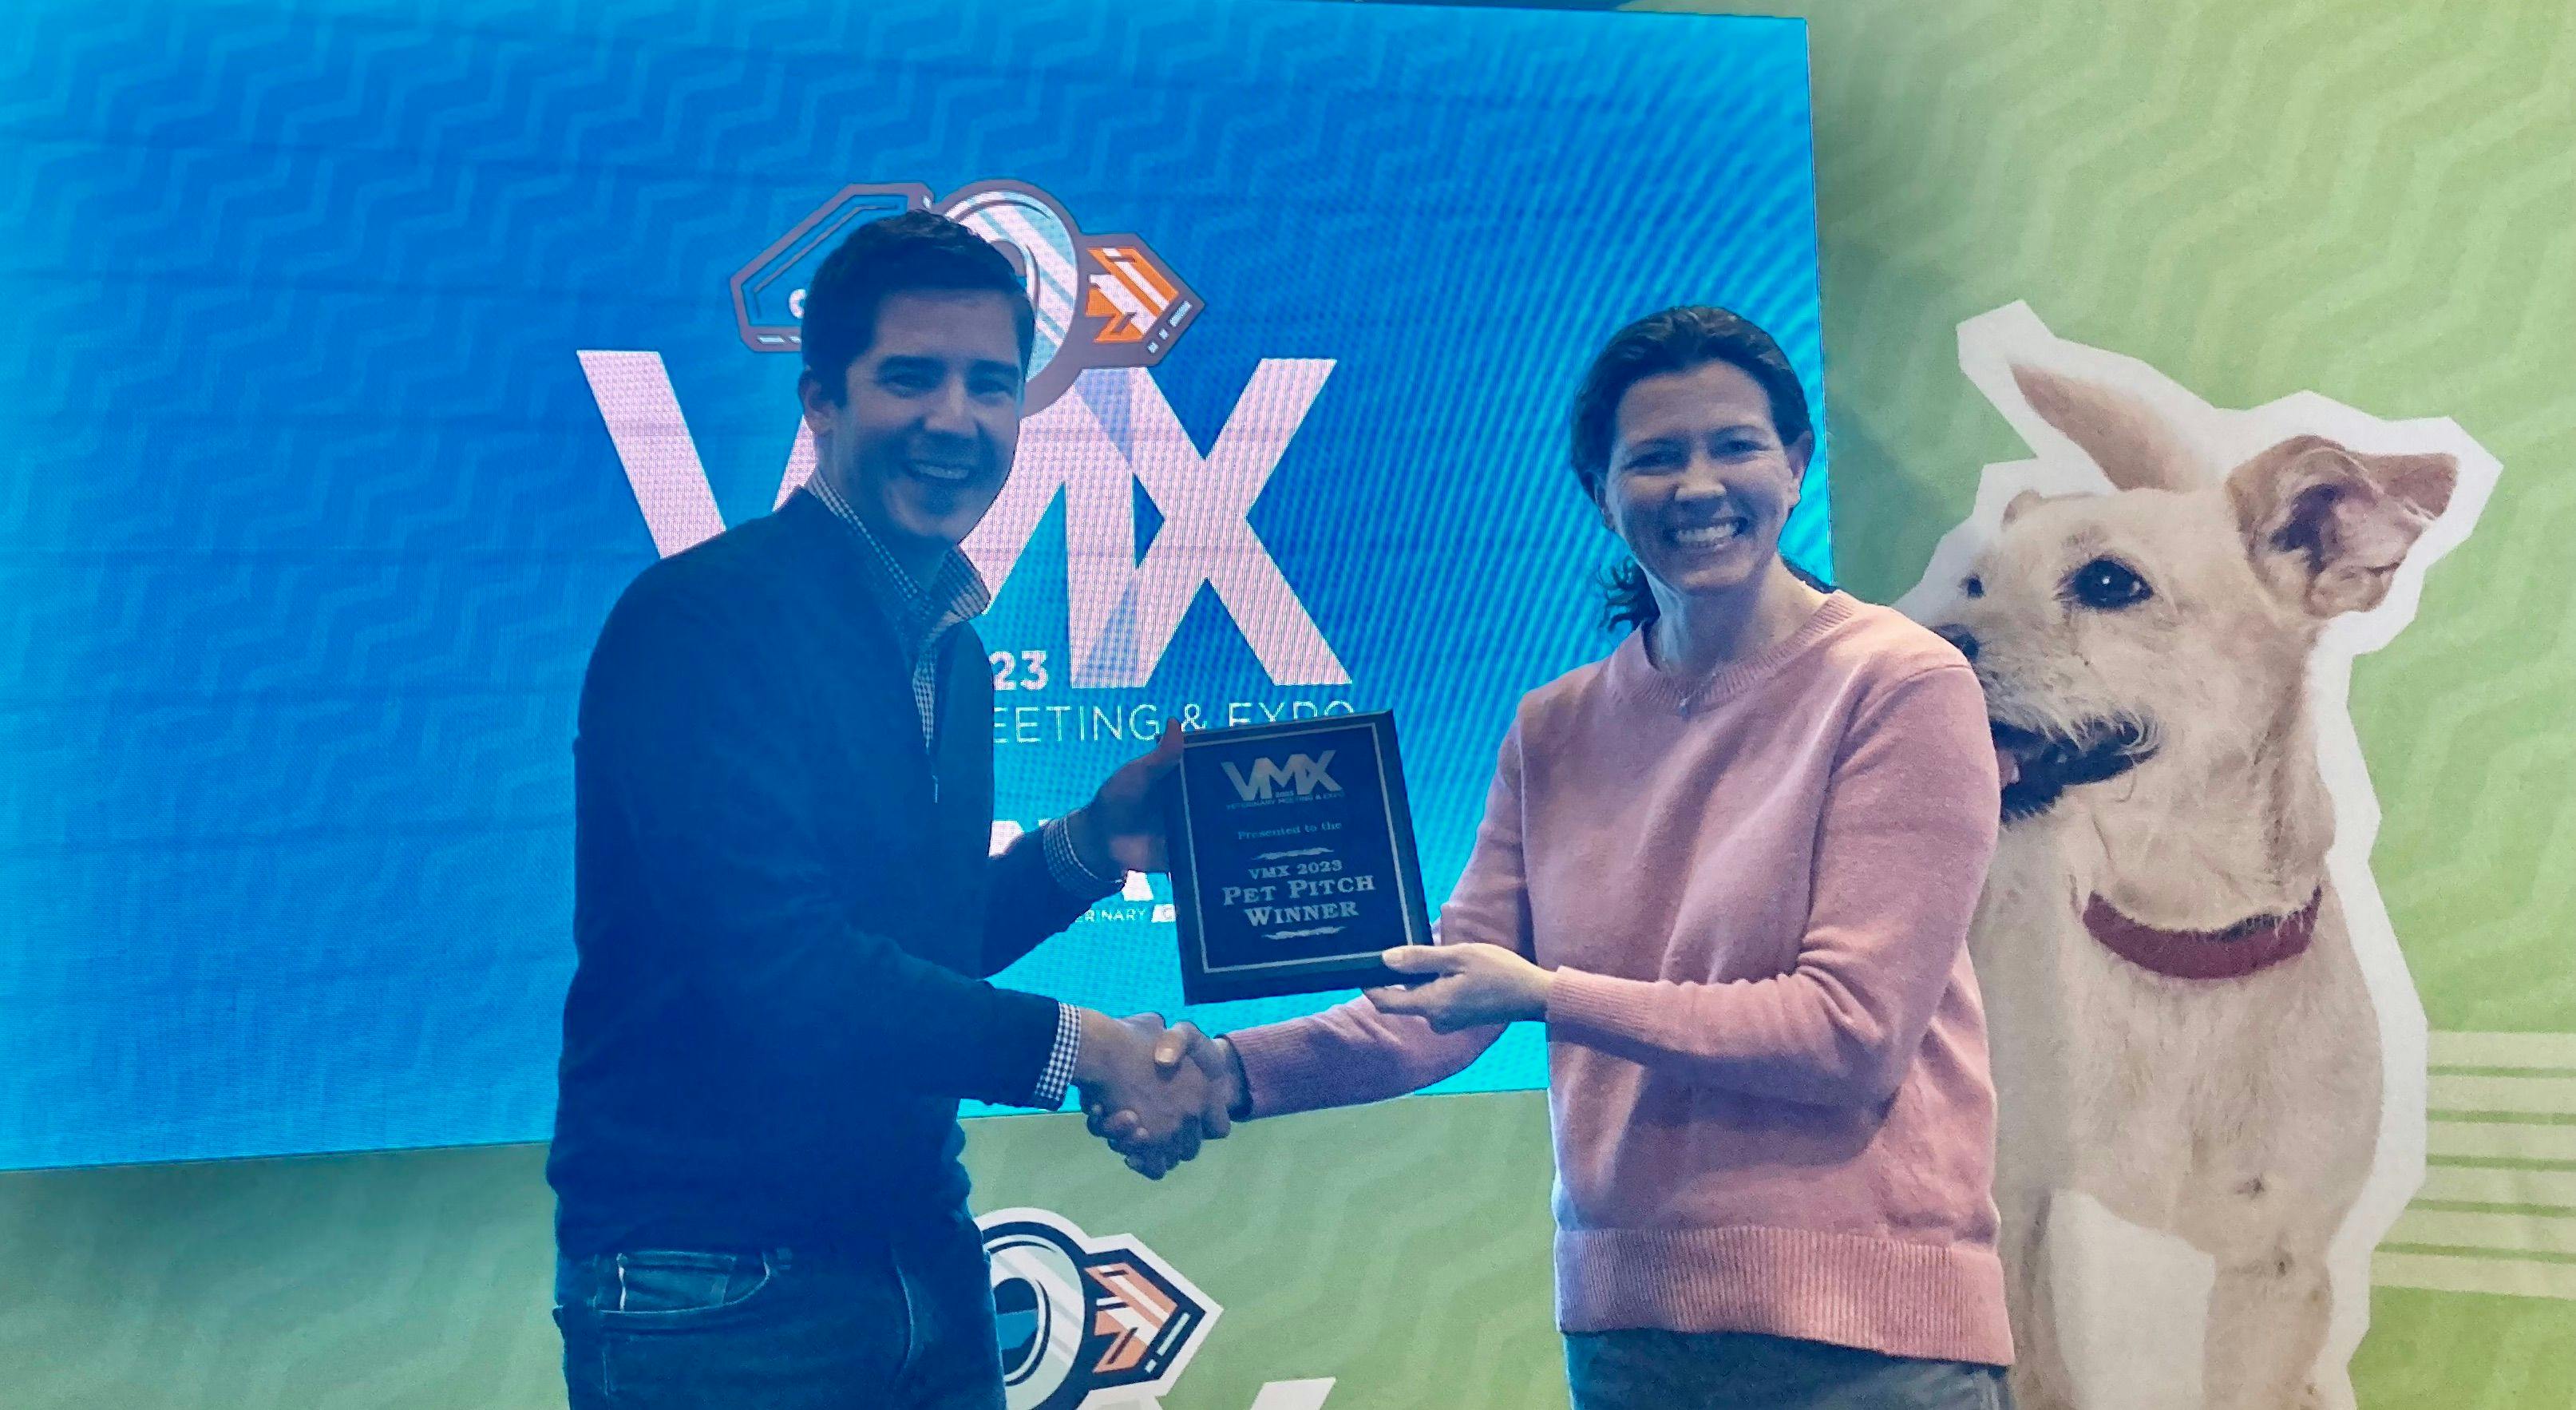 VMX Pet Pitch Competition 2023 winner